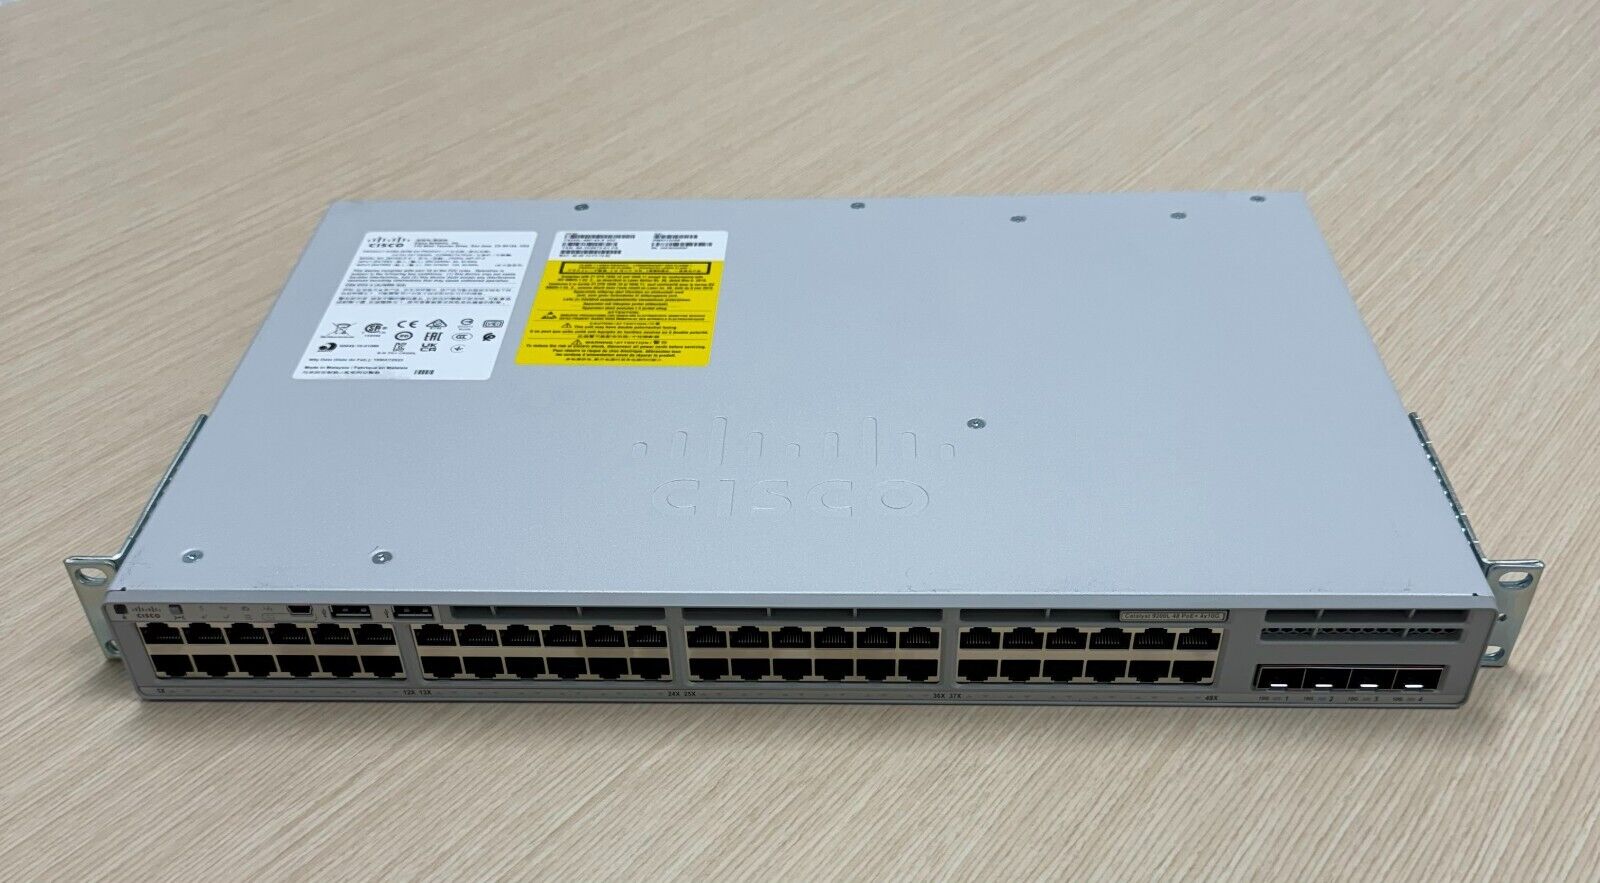 Cisco Catalyst 9200L 48 PoE+ 4x10G Switch with Stack Modules